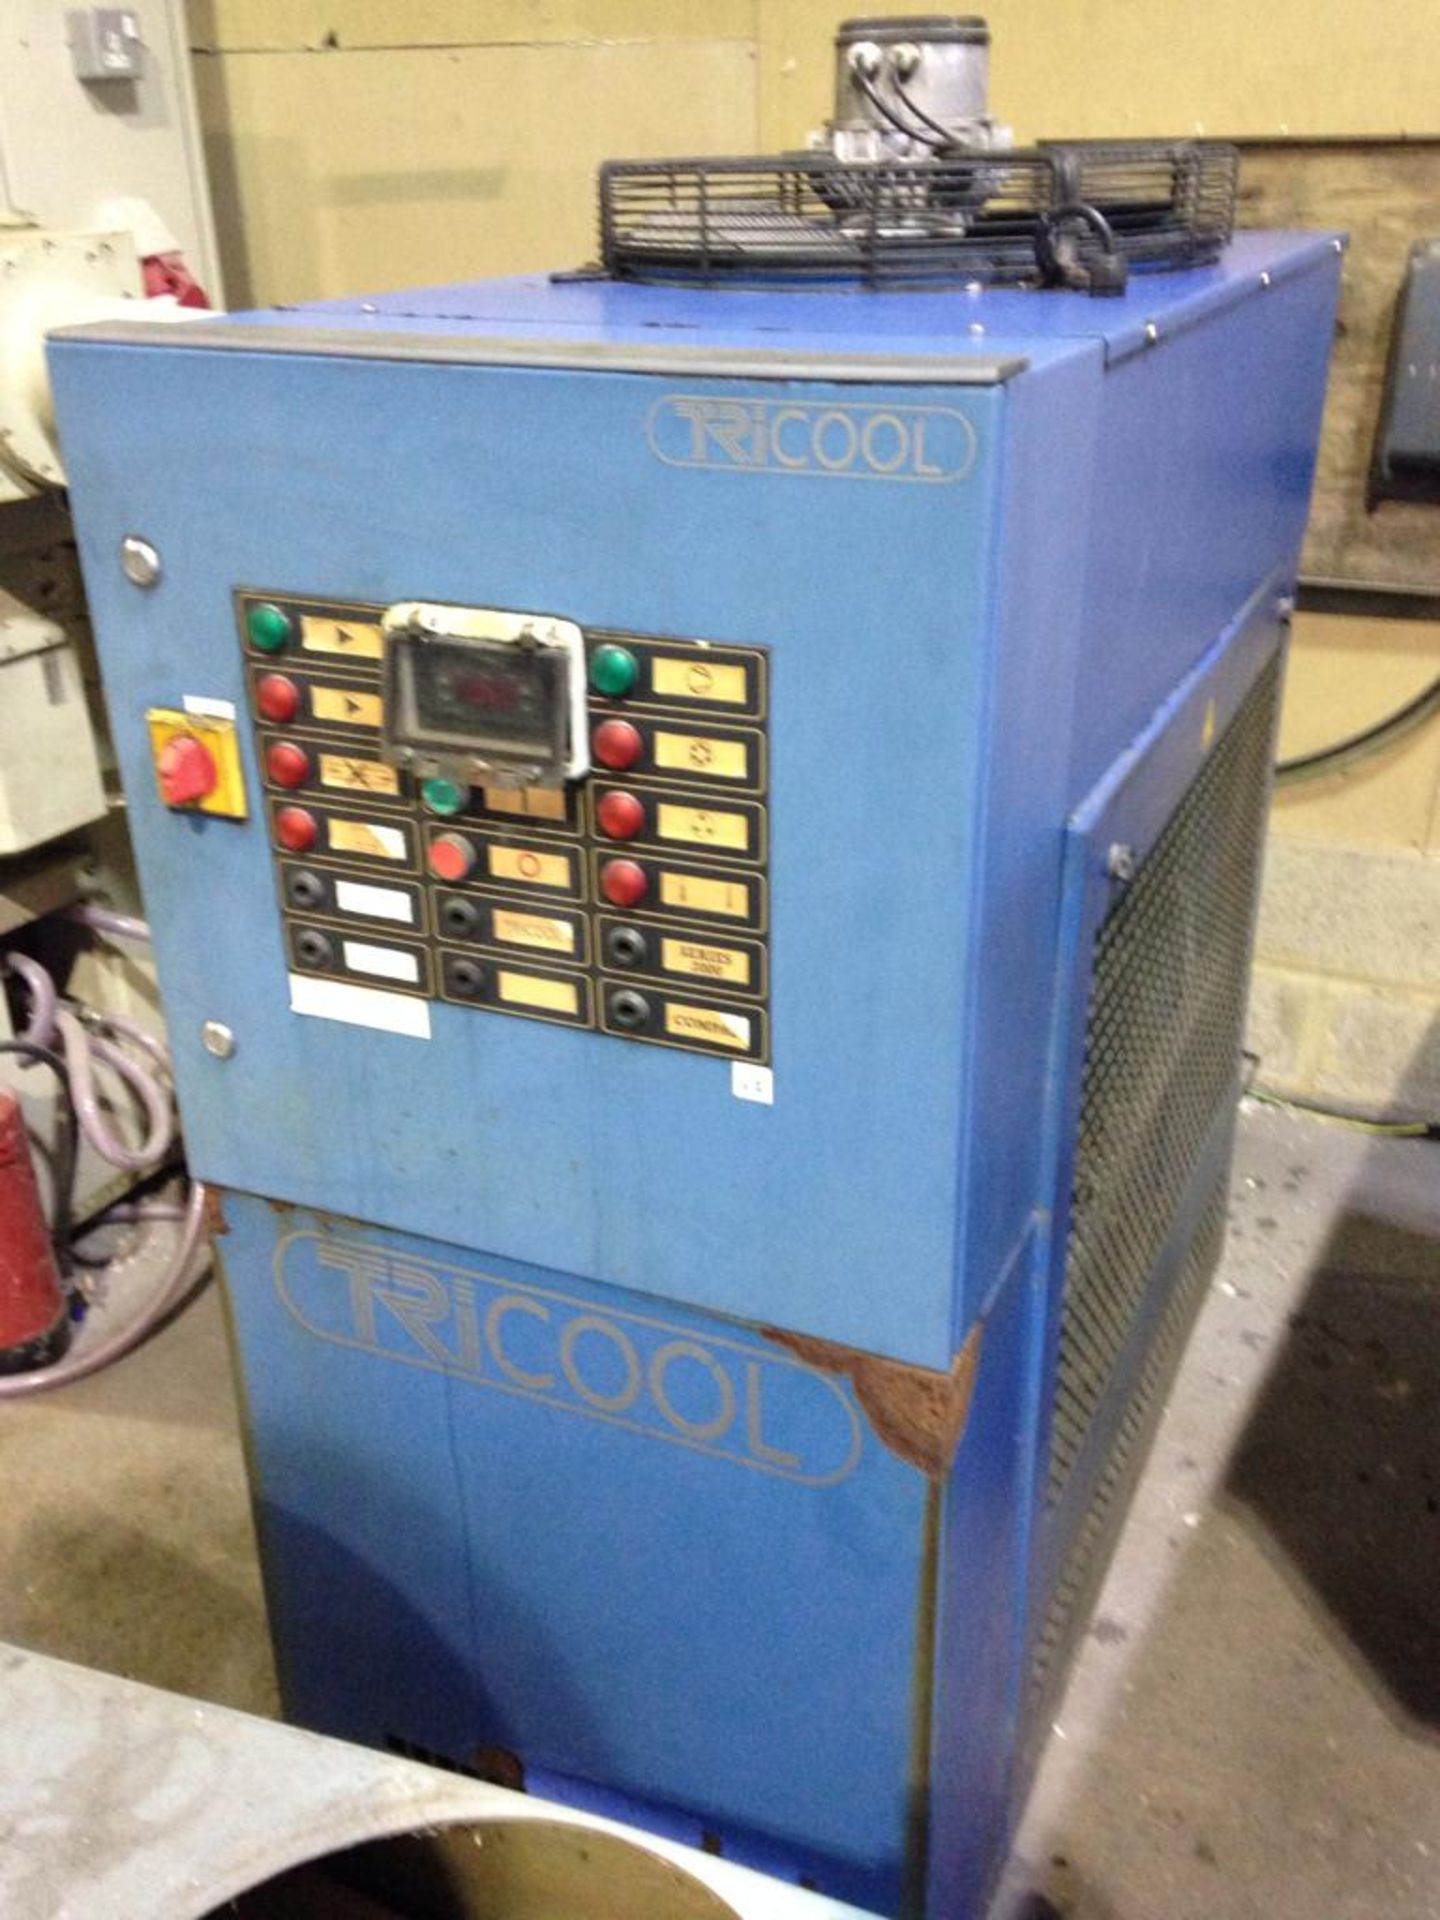 Tricool 21 S2/45EXT Water Chilling Unit, serial no. 45/S2/3561 - Image 2 of 4